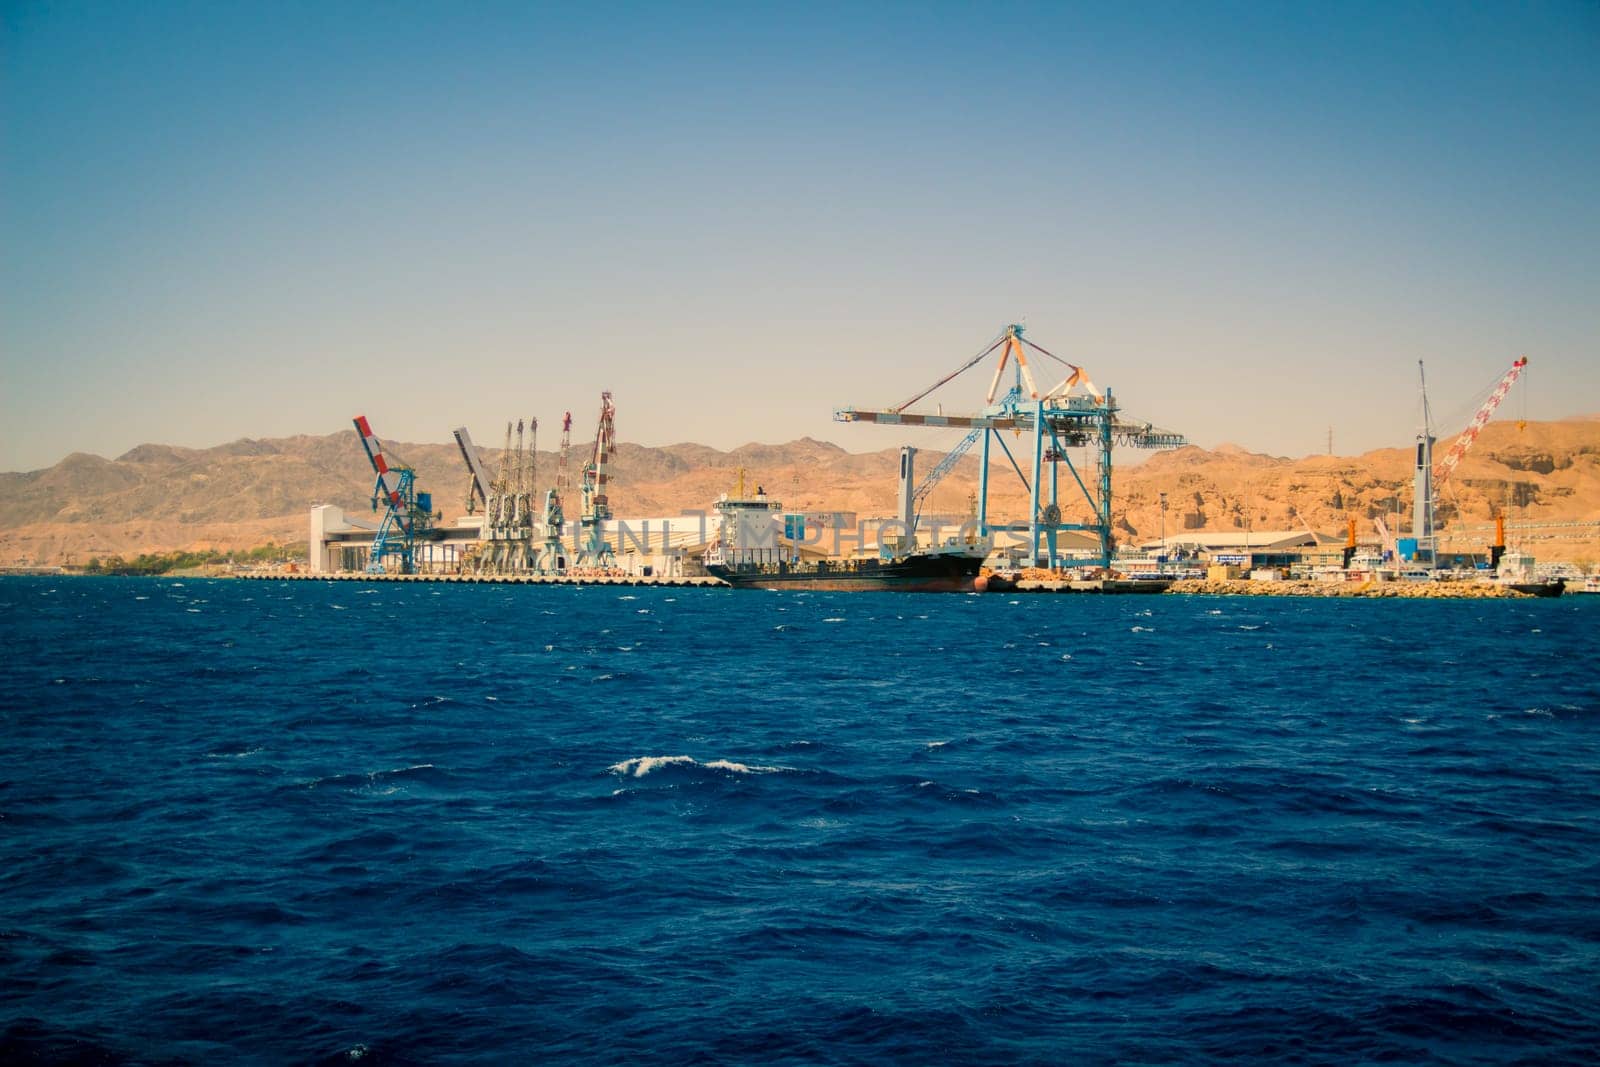 Port of Eilat, Israel.
A cargo ship docked in the port.